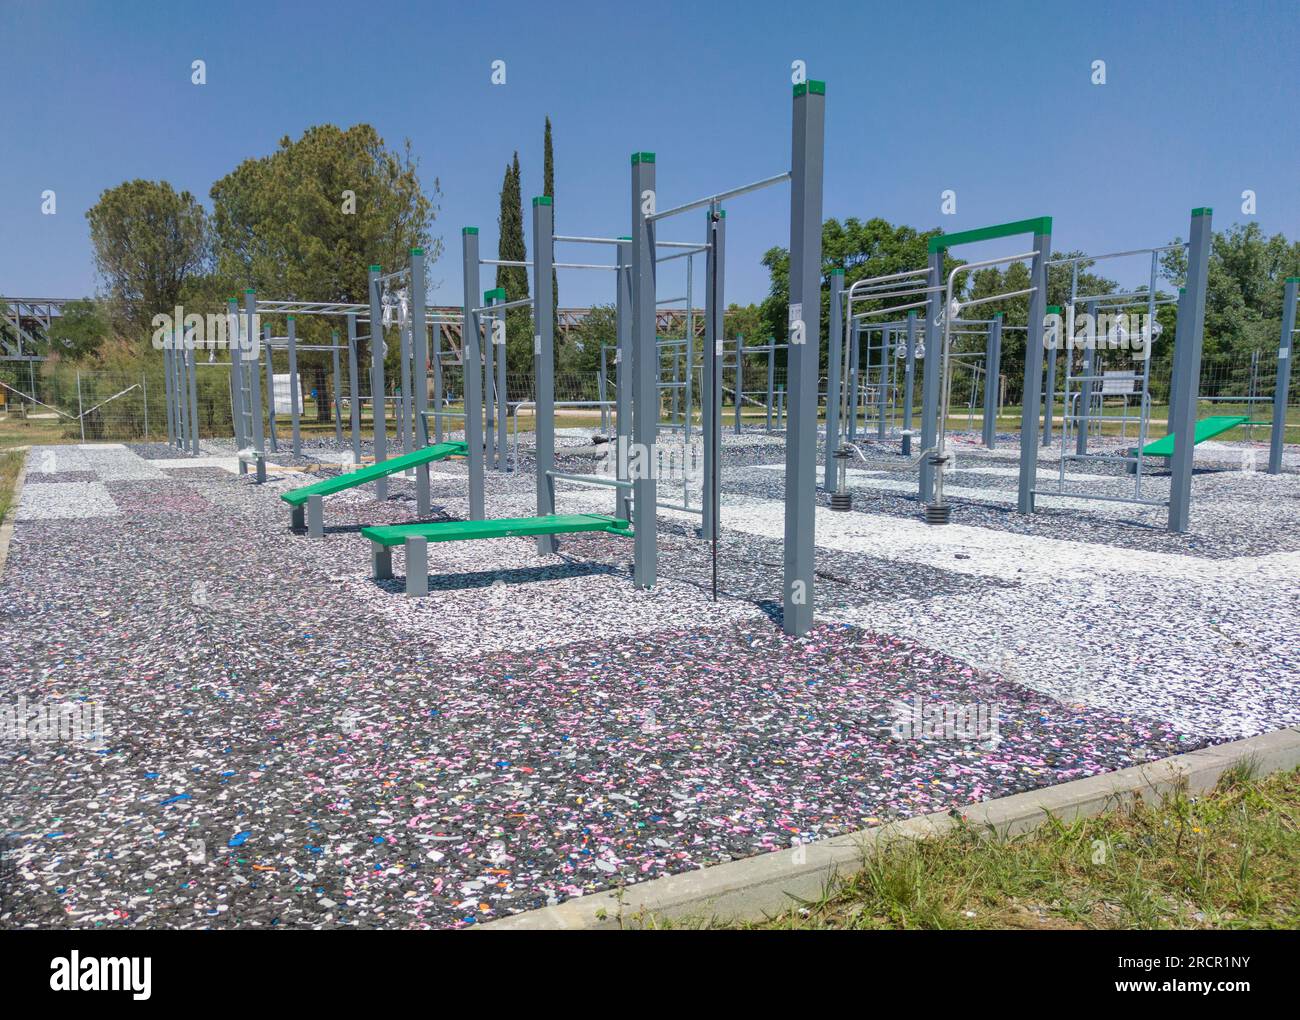 Calisthenics park floor made from recycled rubber particles. Outdoors daylight shot Stock Photo